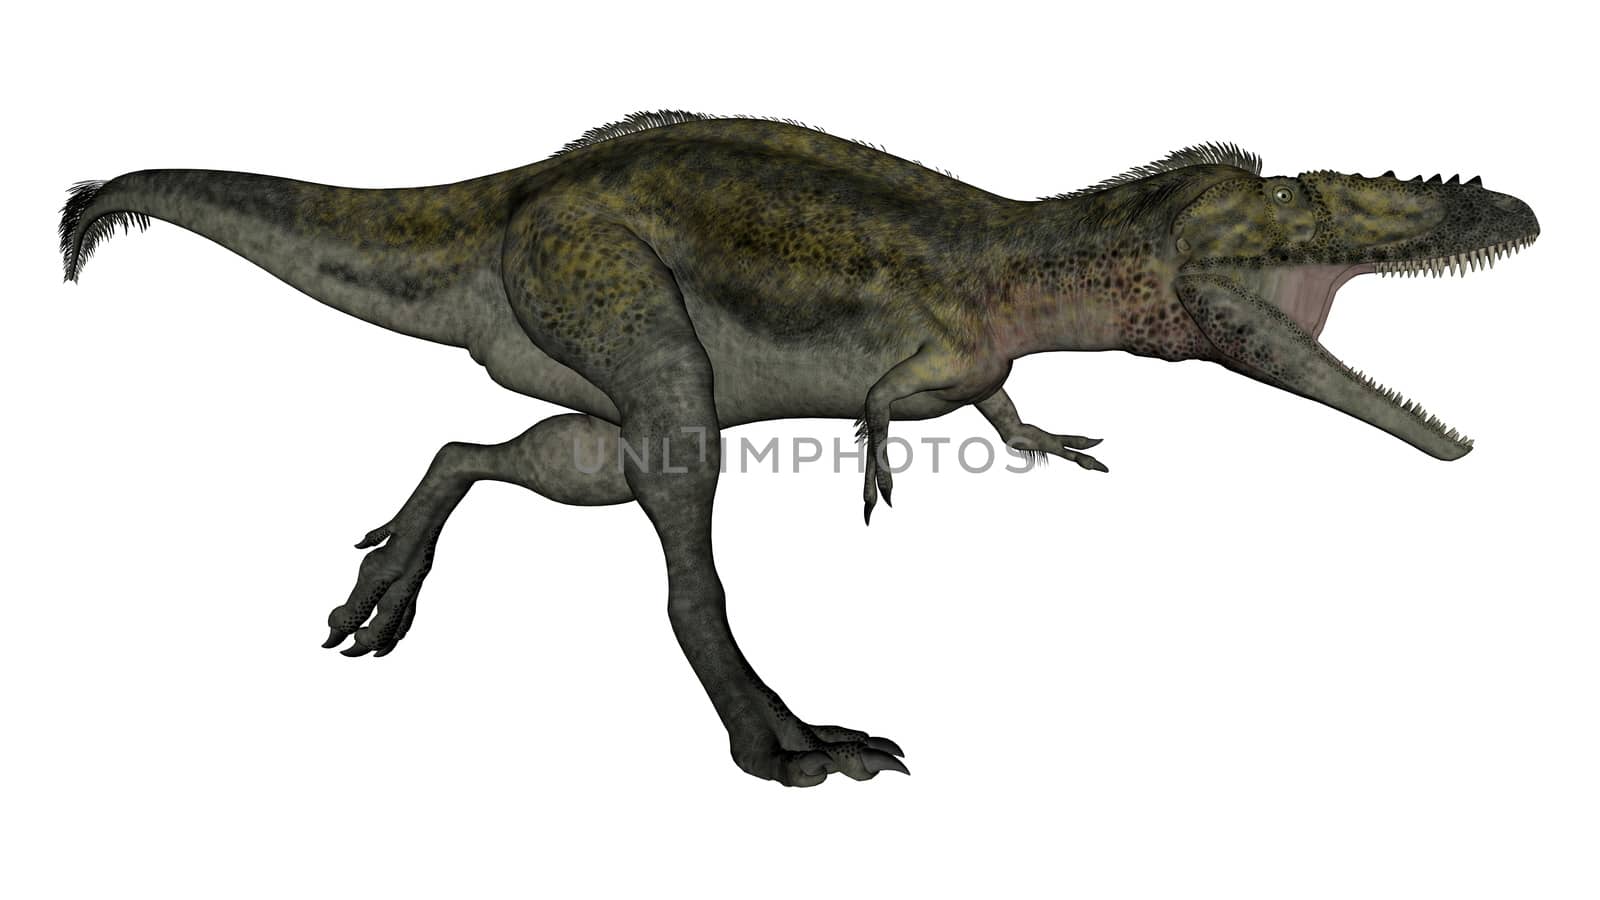 Alioramus dinosaur running and roaring isolated in white background - 3D render